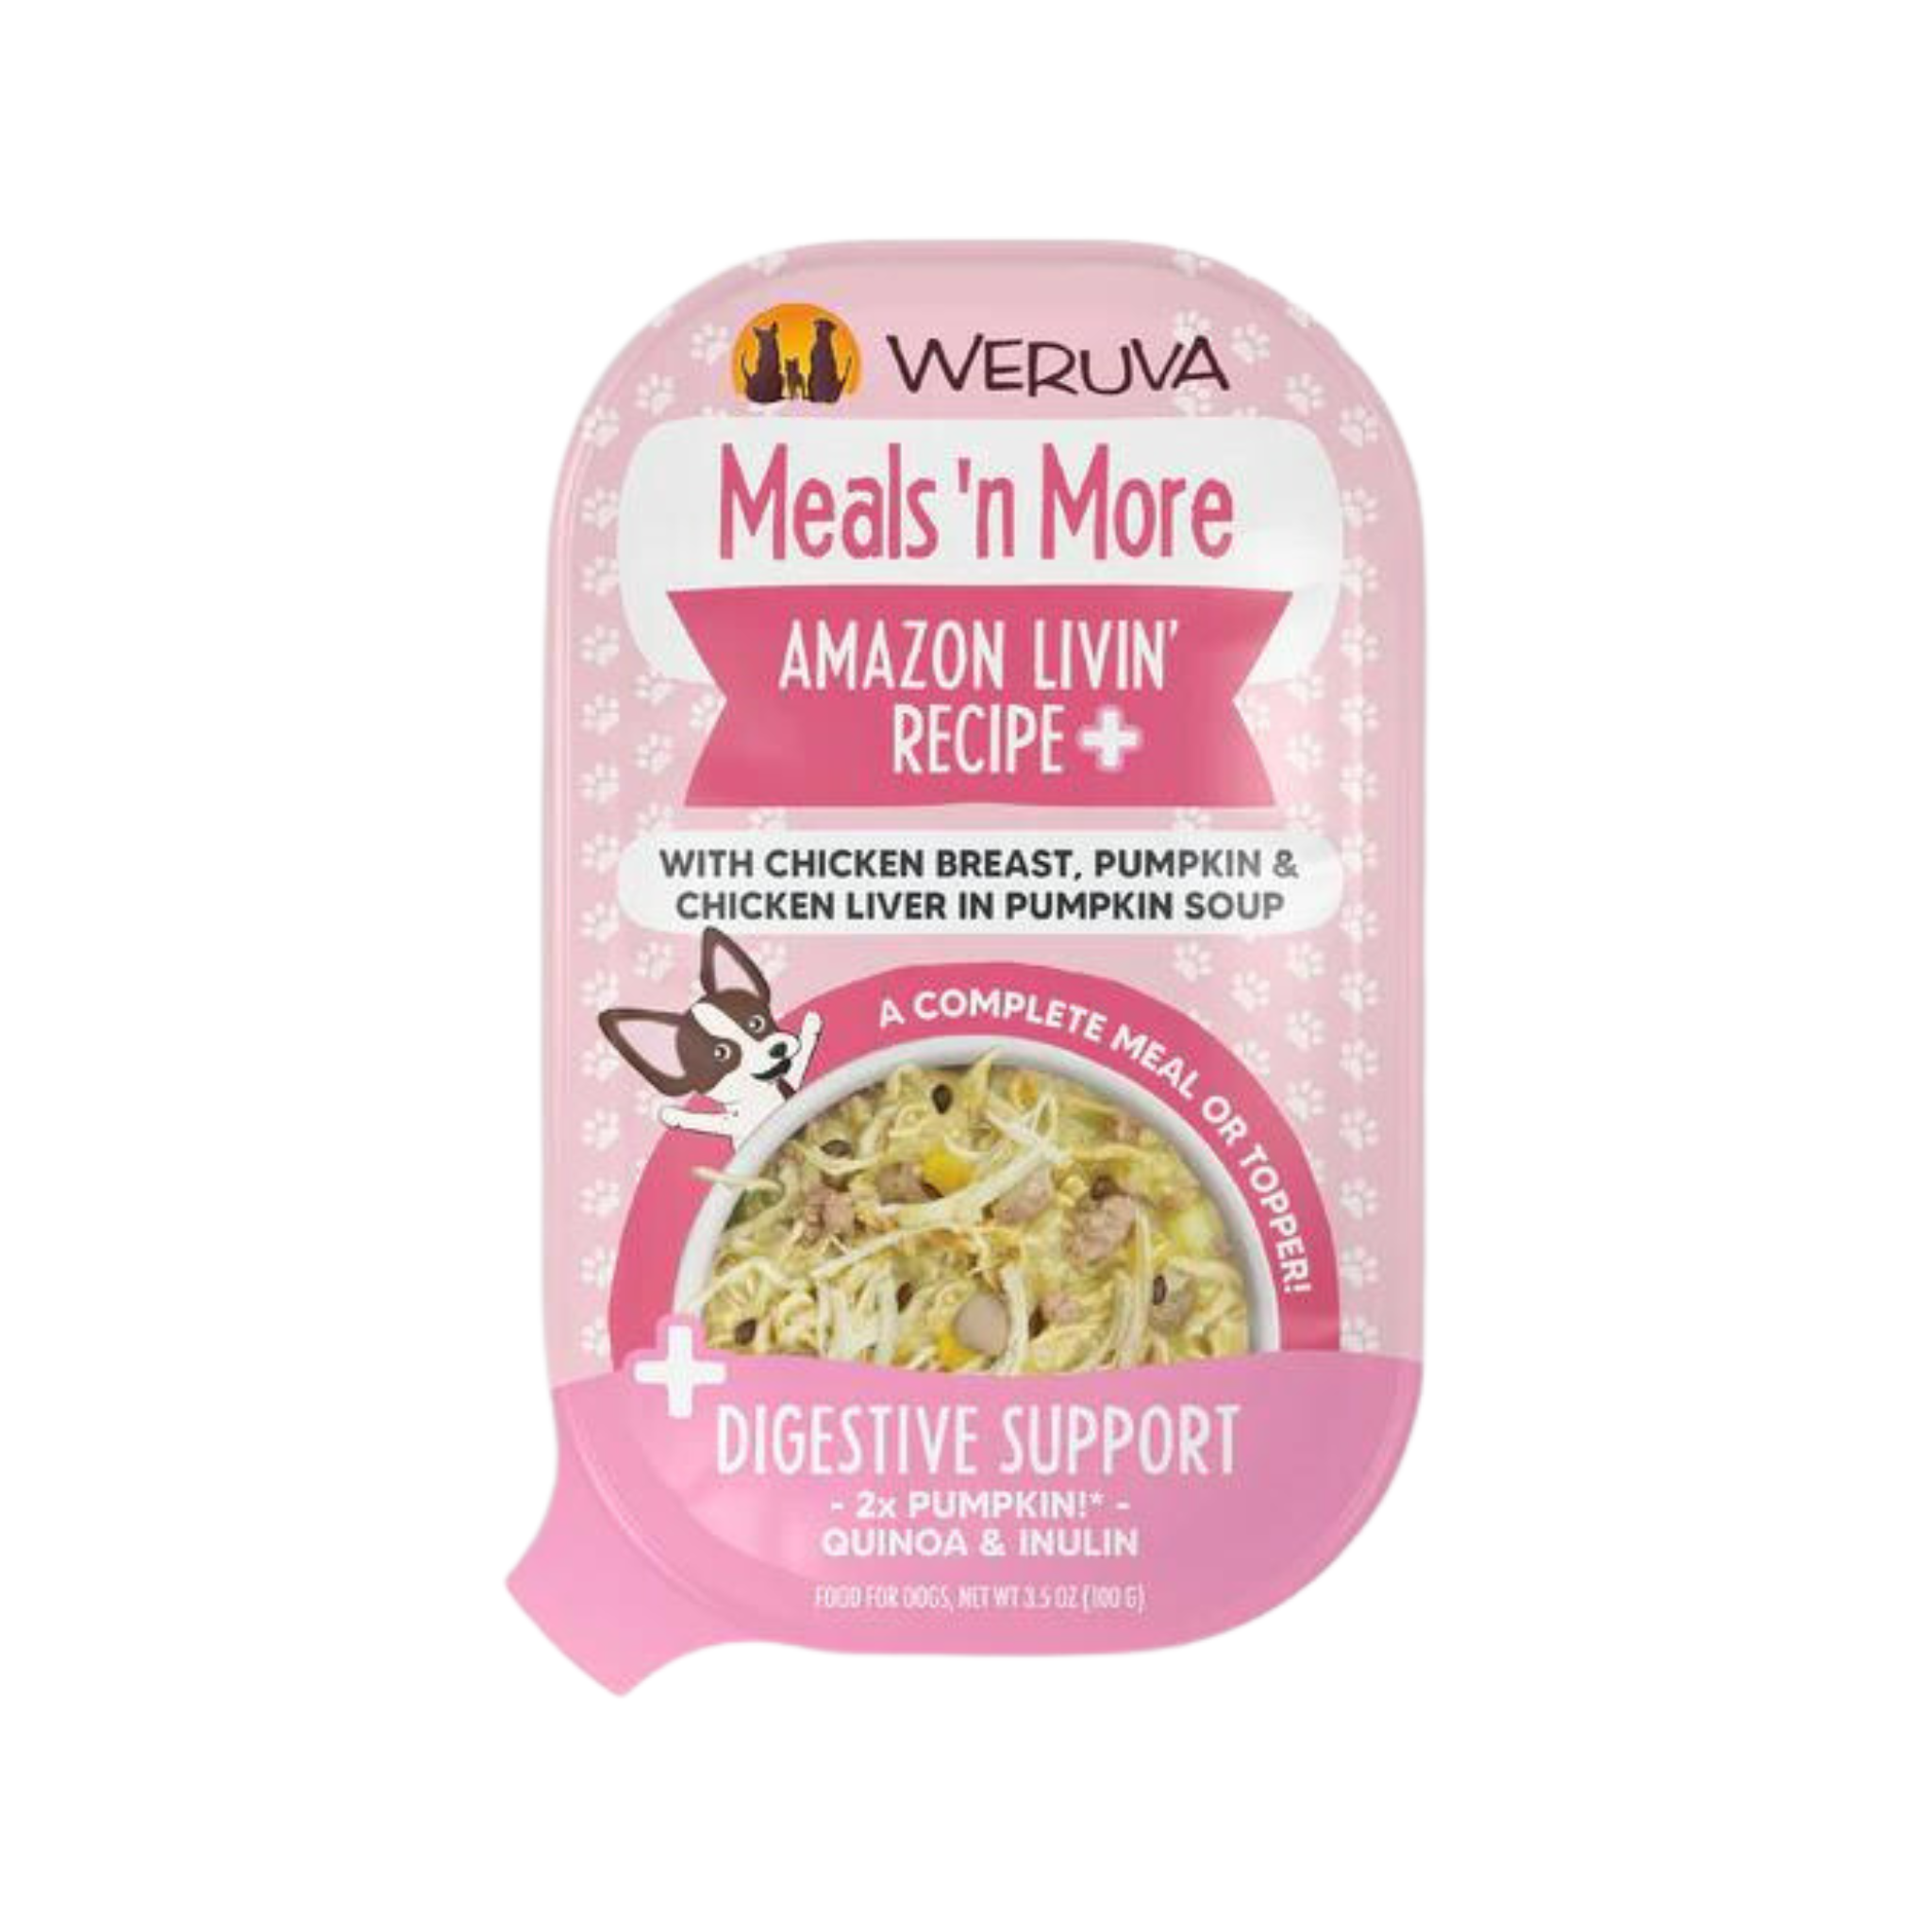 Weruva Meal's N' More Amazon Livin' Recipe Plus Digestive Support Dog Cup